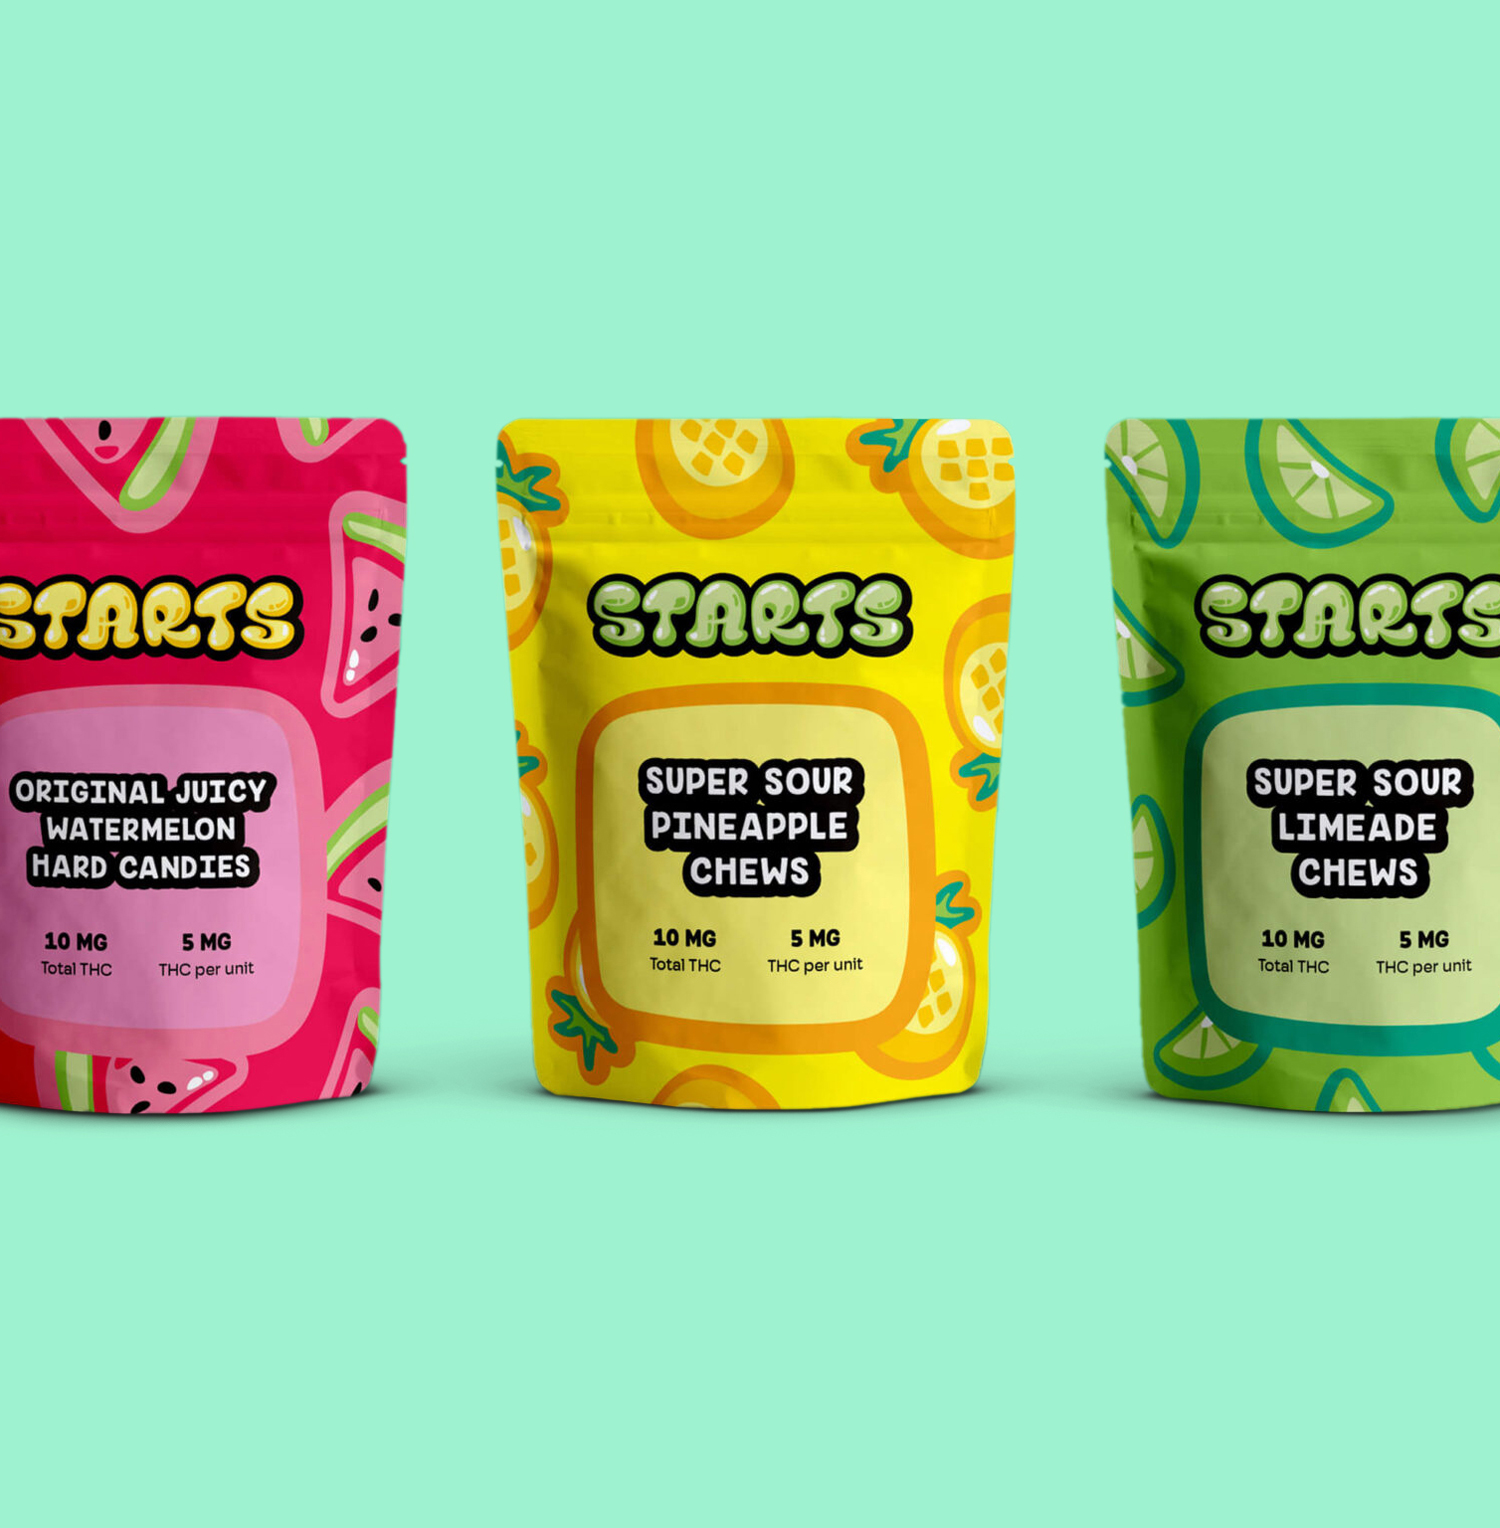 Revisit simpler times with Starts' array of cannabis-infused candies, invoking joy, one delightful candy at a time.